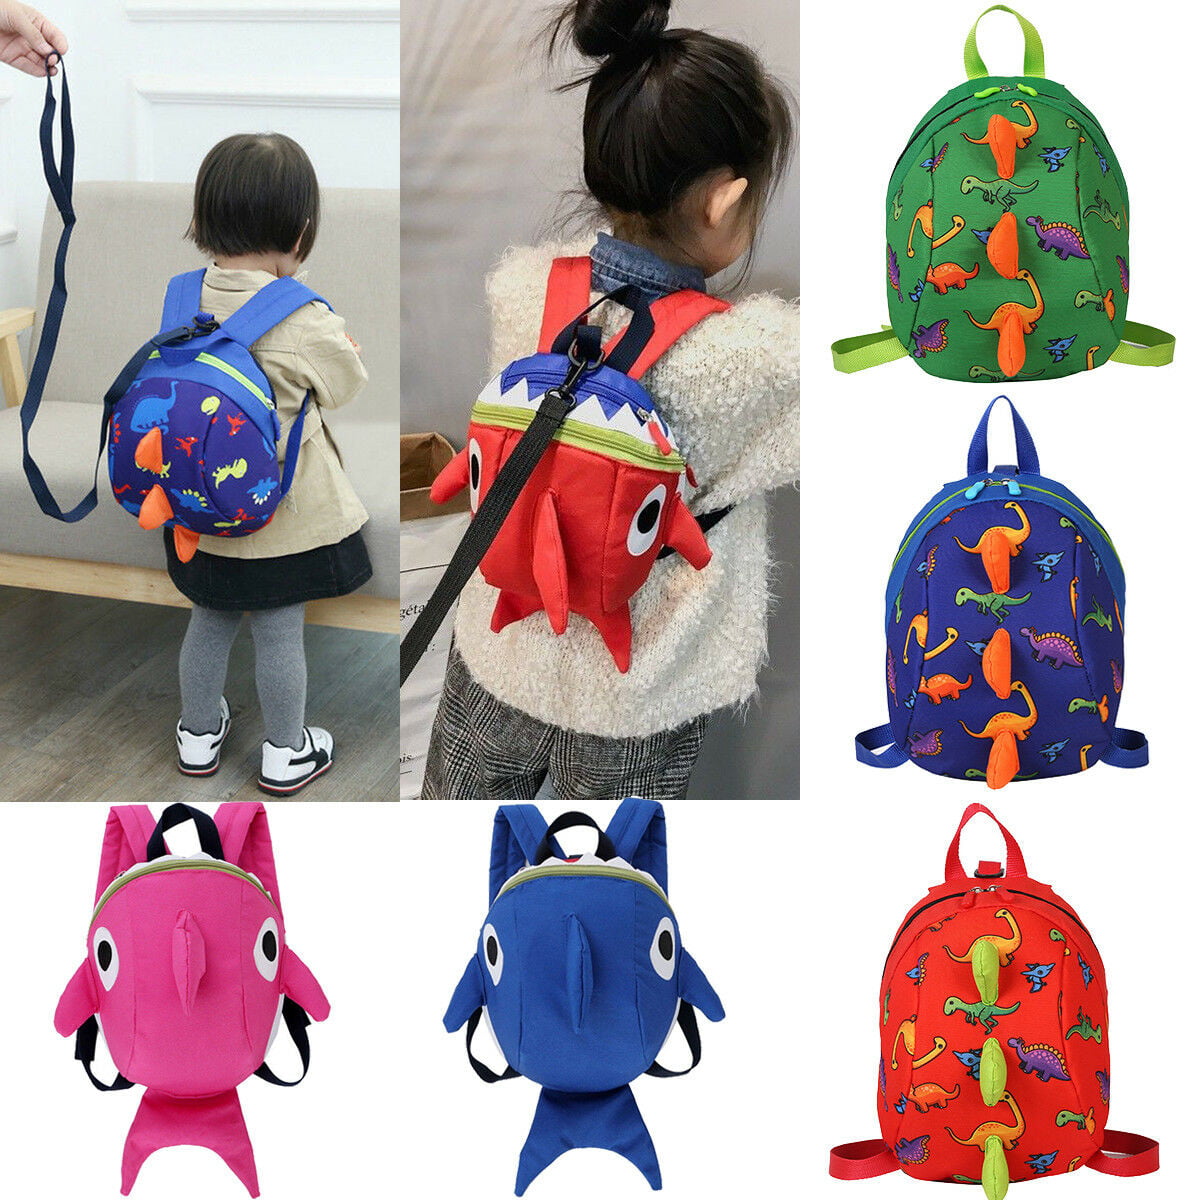 Cute Baby Toddler Safety Strap Kids Bag Harness Strap Bag Backpack with Reins 